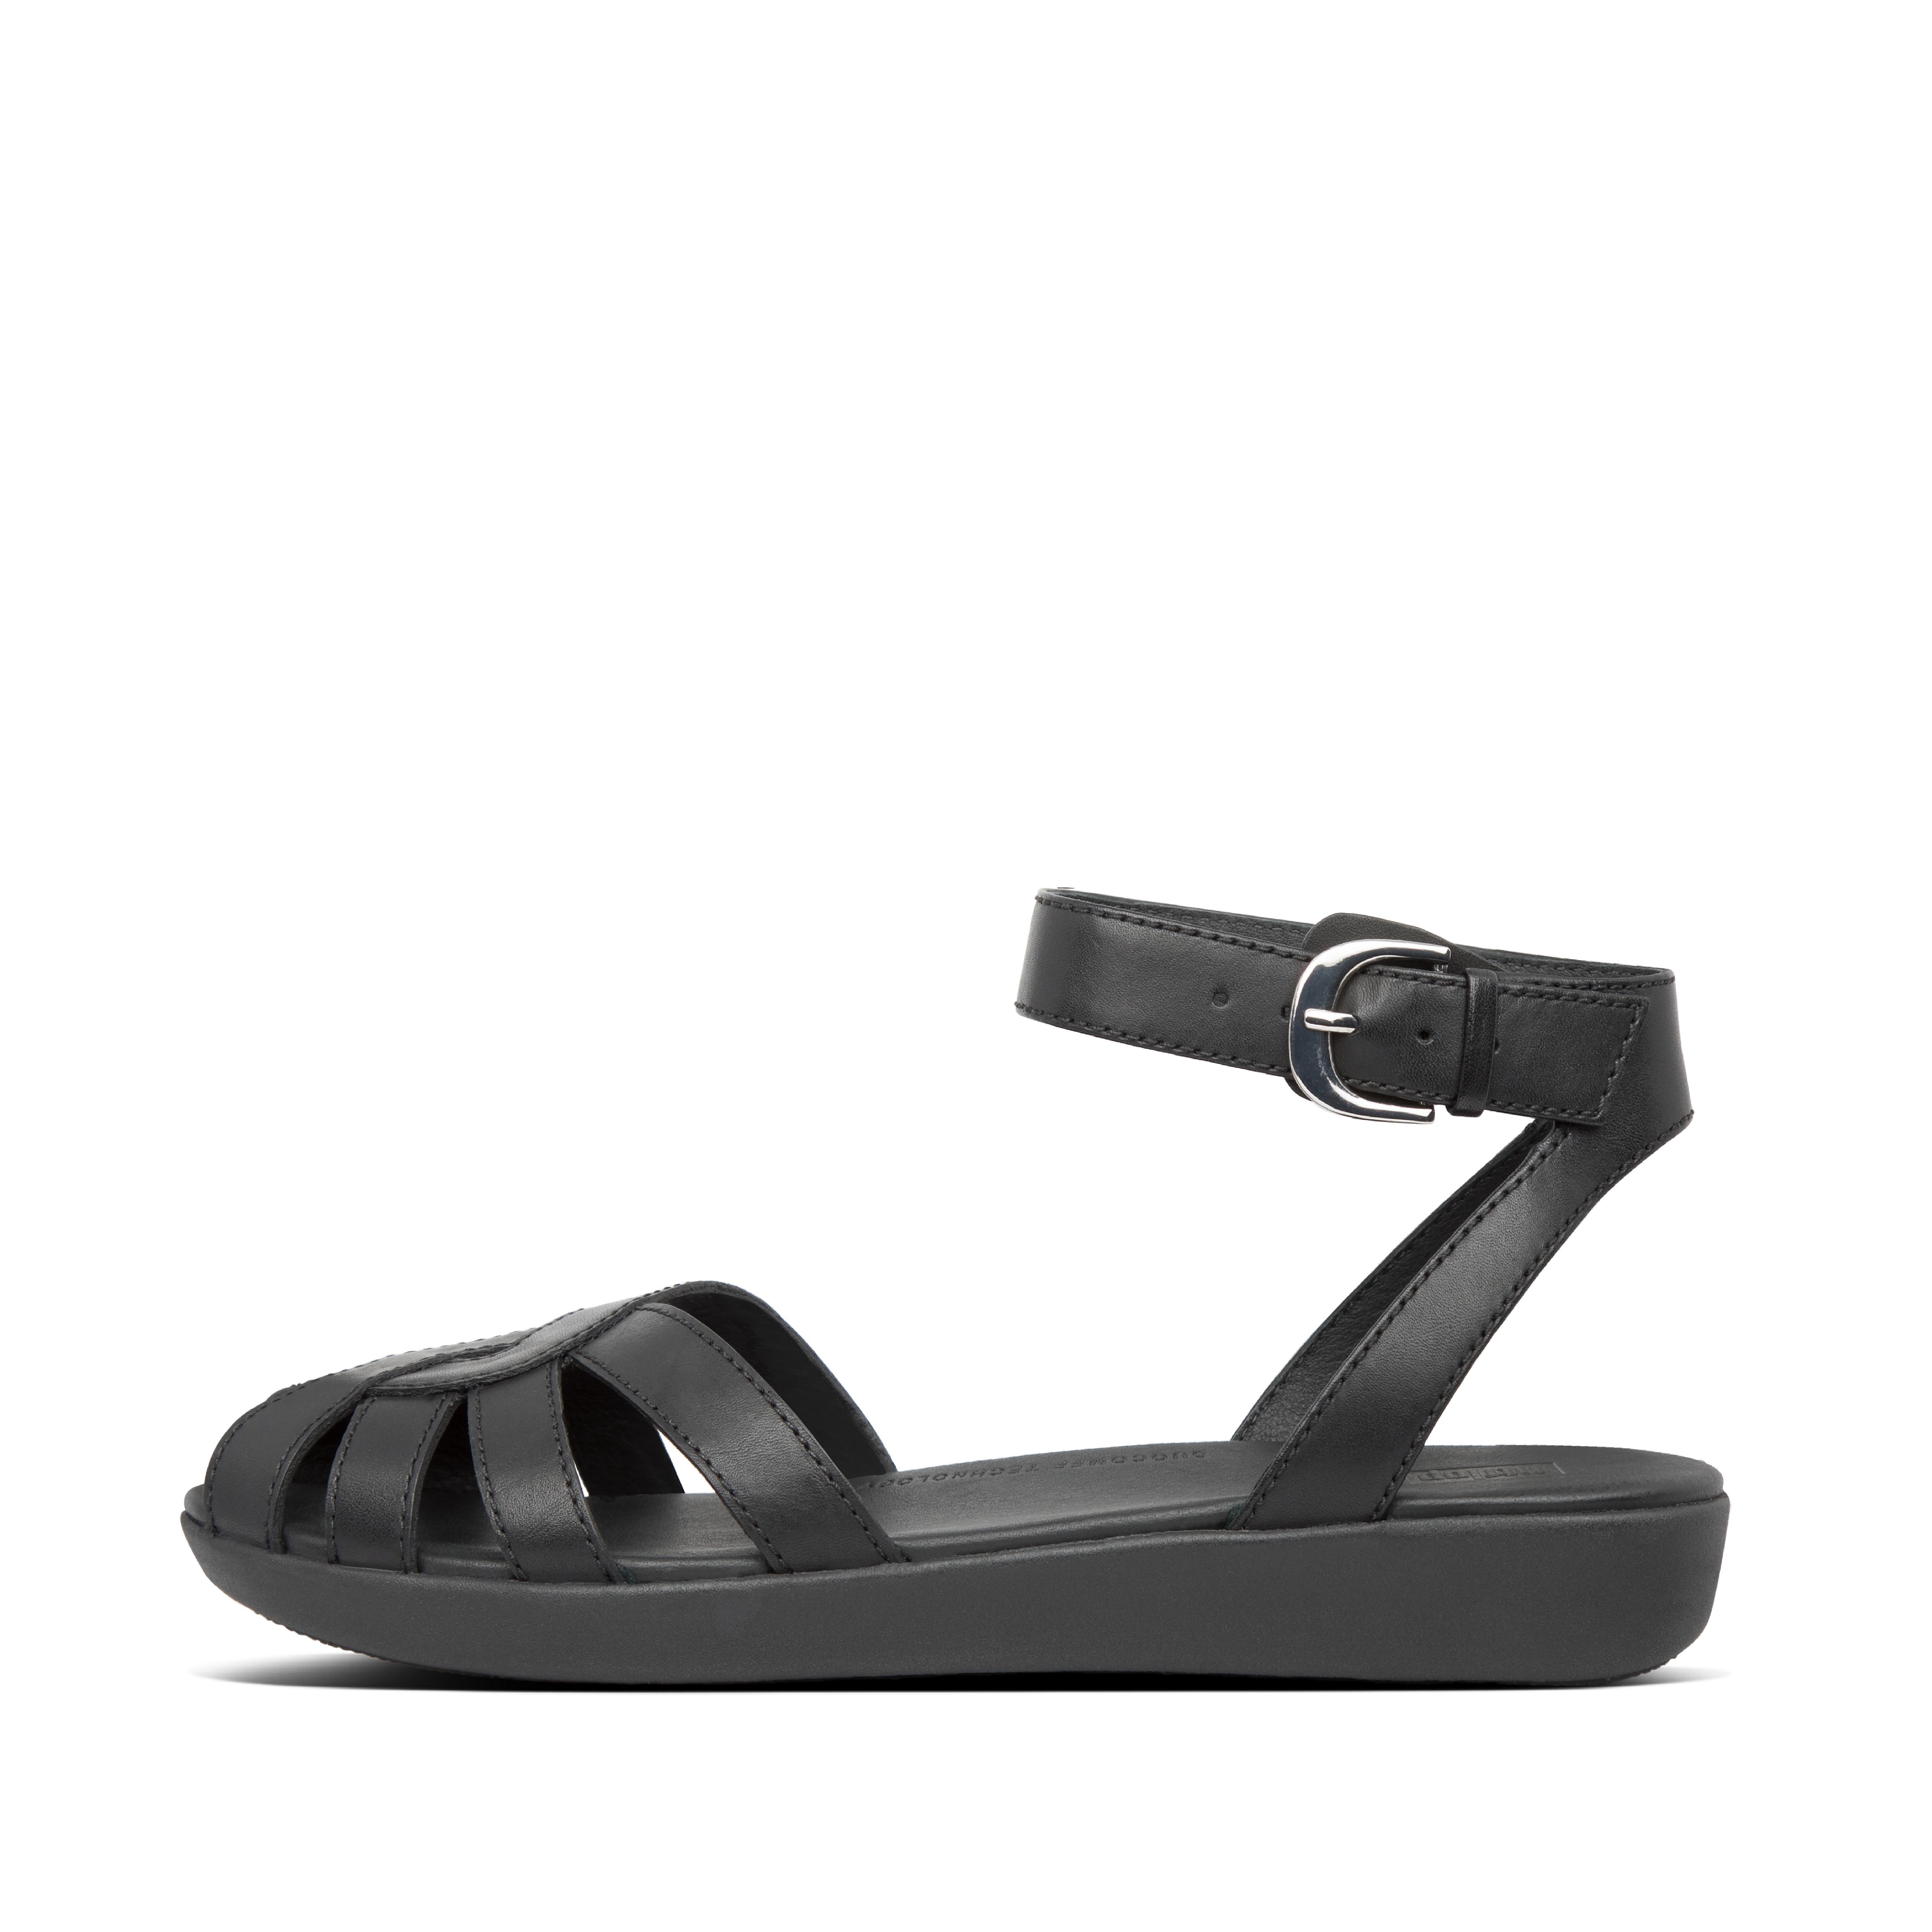 women's sandals with covered toes